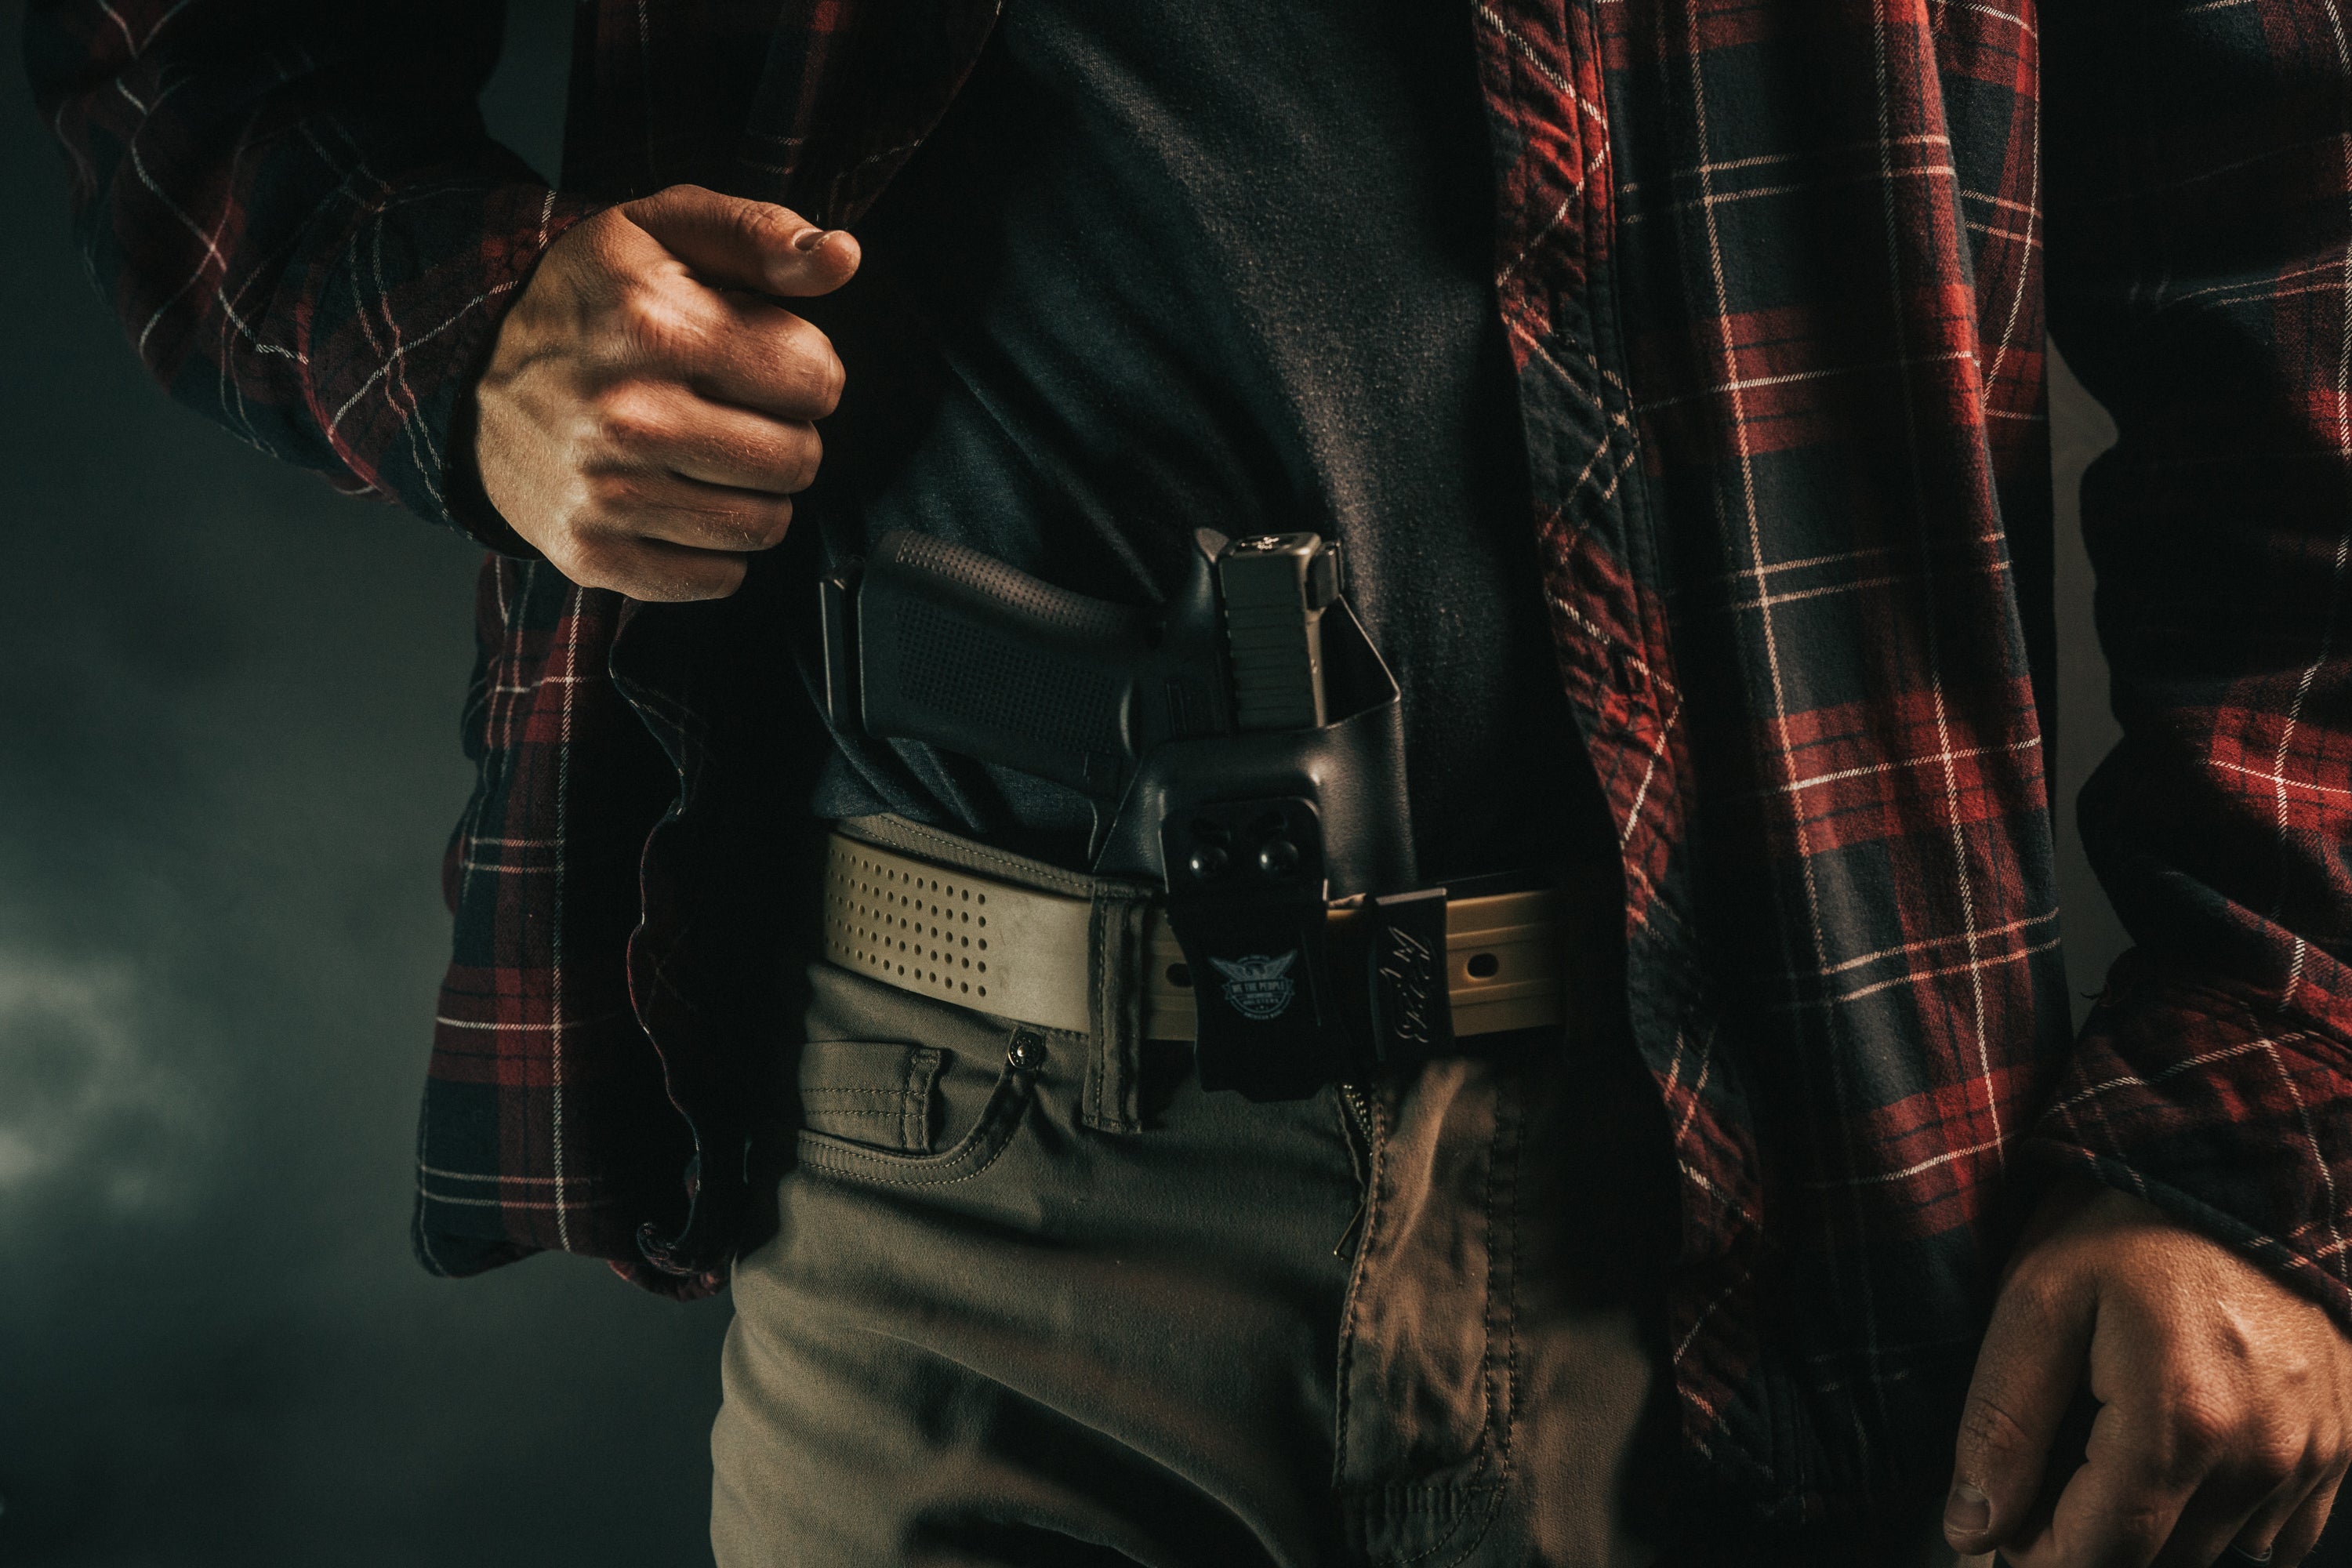 Appendix carry belt  by Ridge Belts. Tactical belt buckle for the outdoors. Simple mens belt buckle for conceal carry. EDC belt for all sizes. Lightweight mountain hiking belt. Tactical conceal carry belt for every day carry. Military grade belt for men. Tactical conceal carry belt.